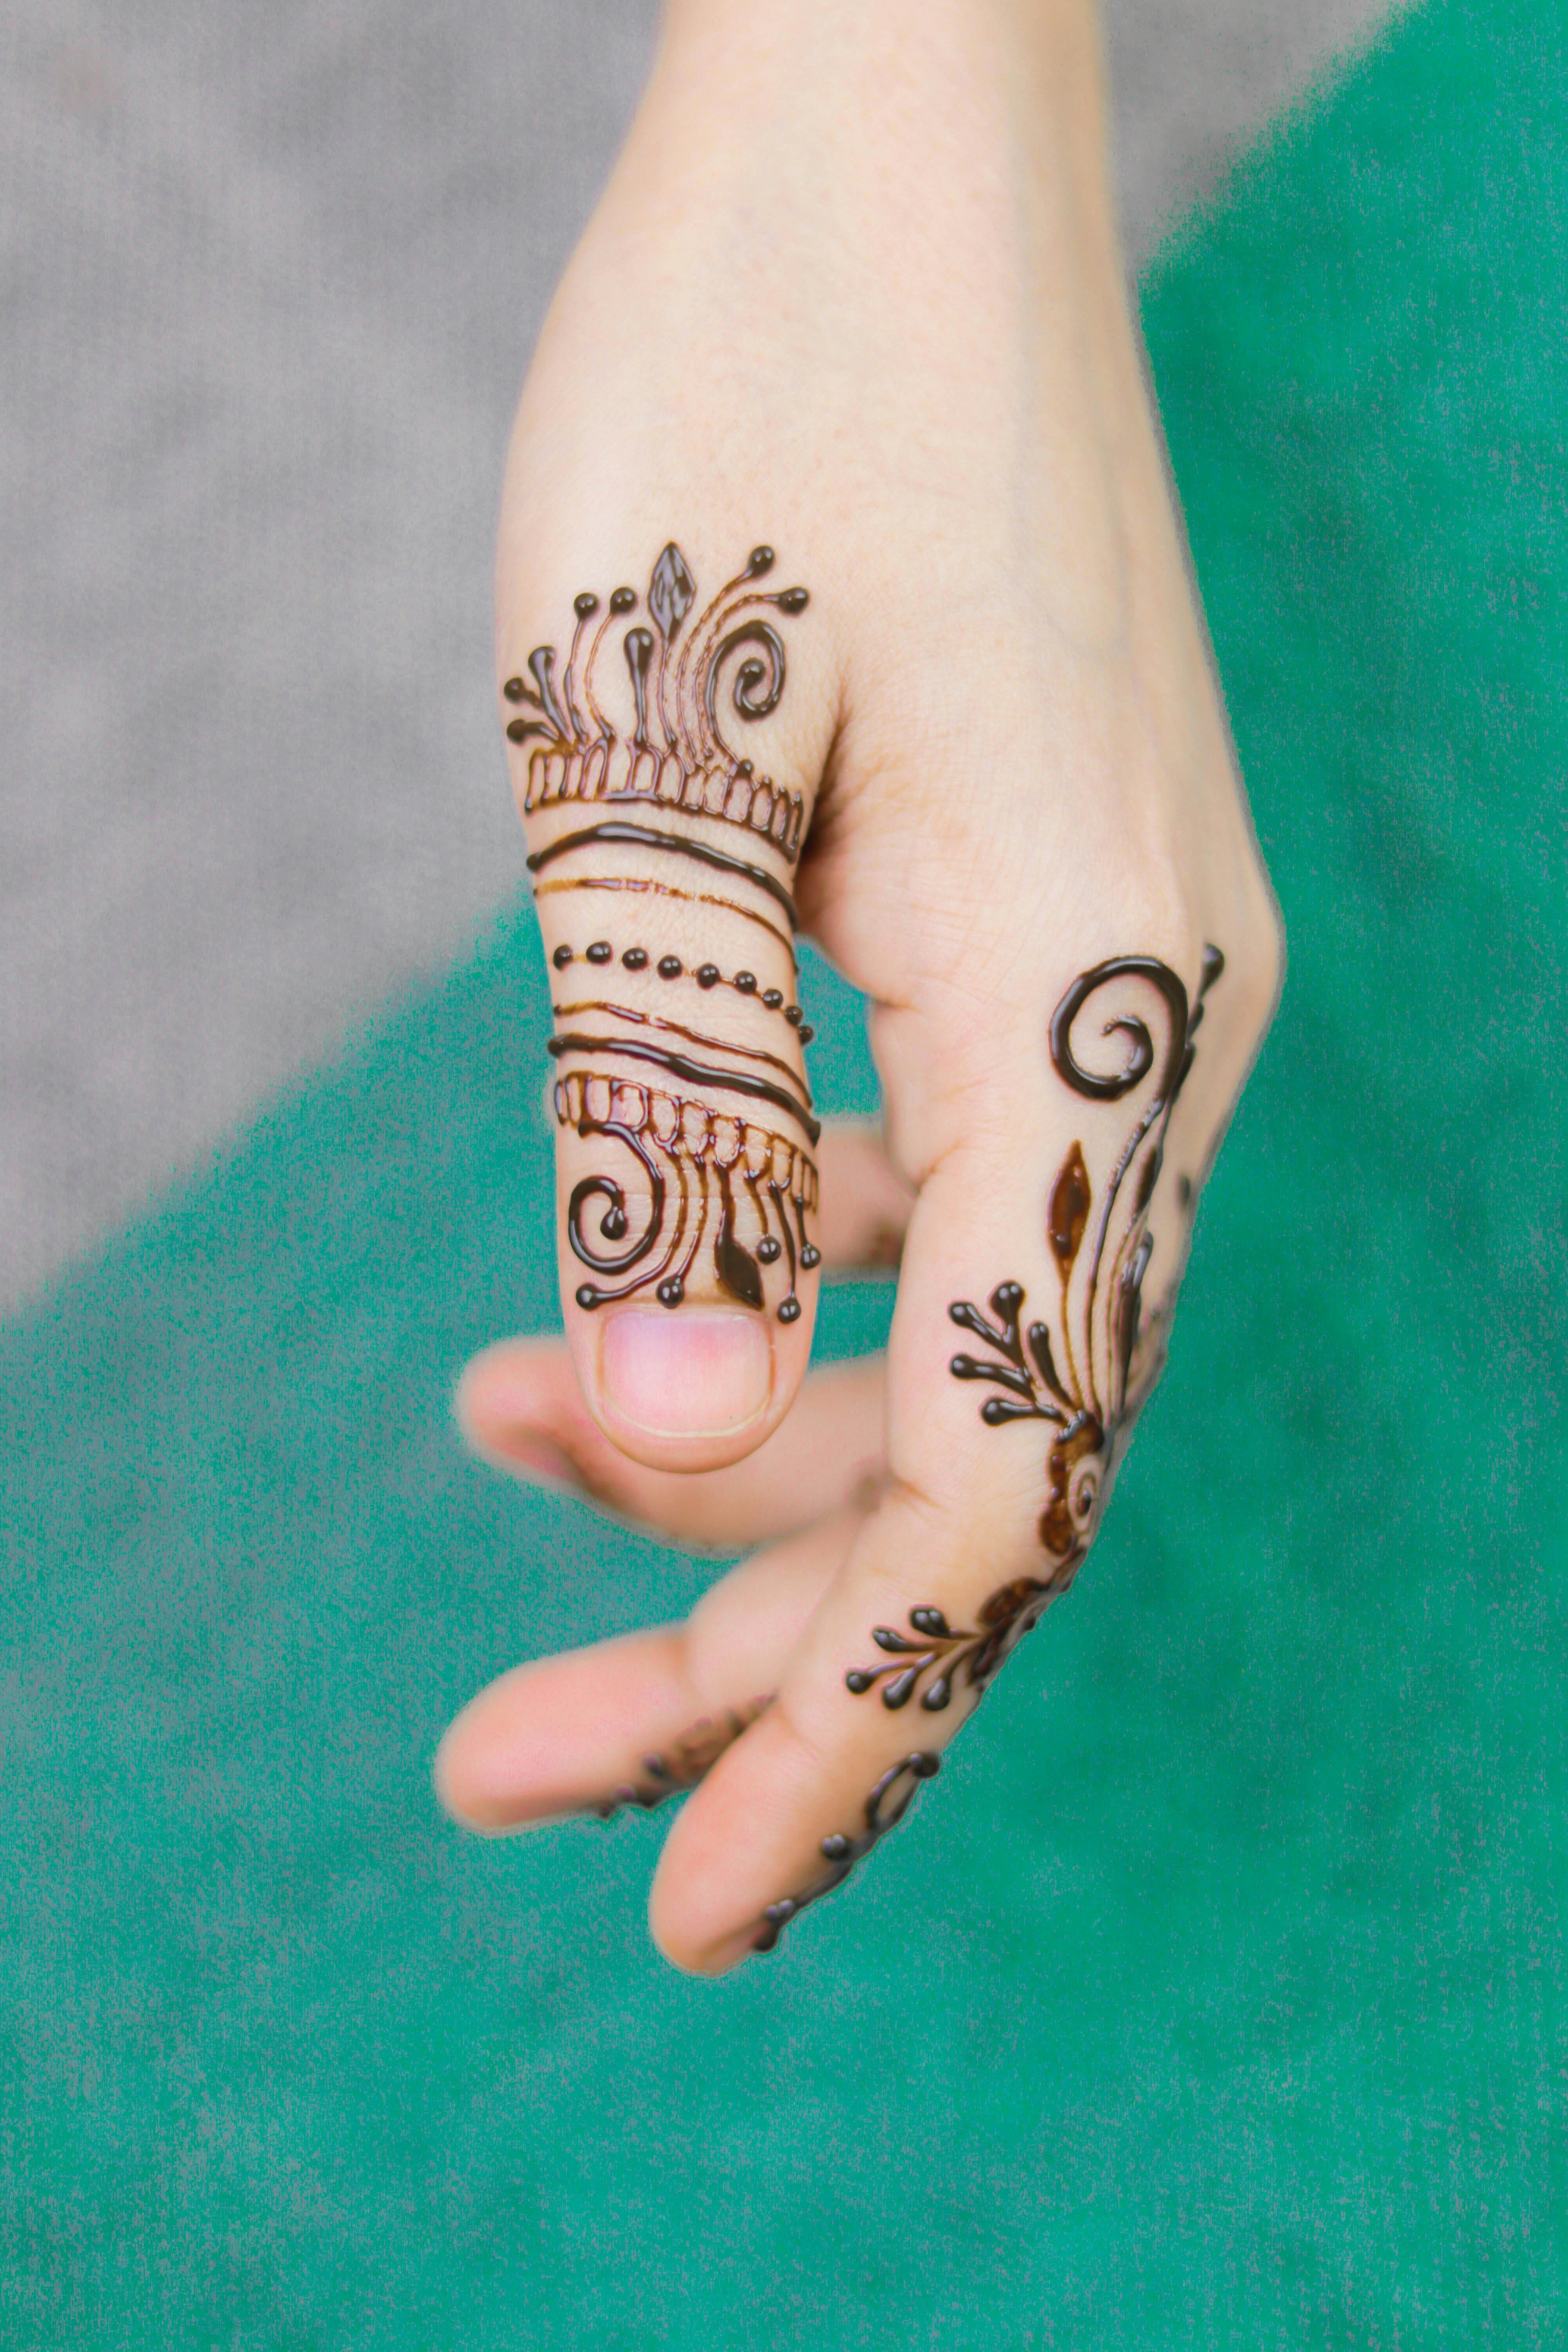 This Little Girl May Be Scarred For Life After Getting A Henna Tattoo